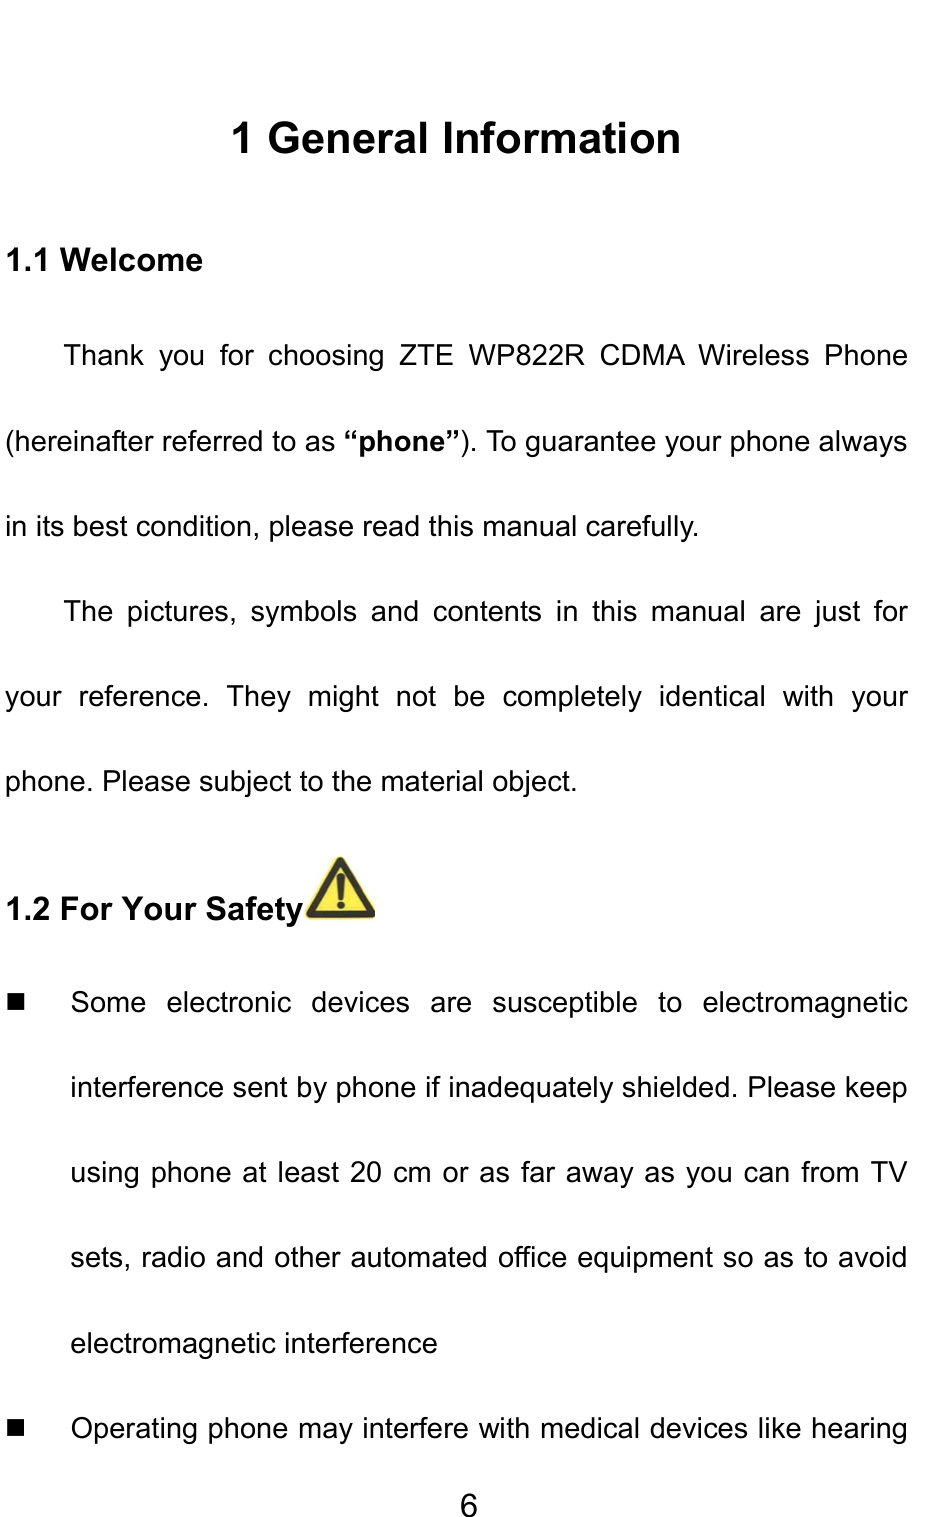                                     61 General Information 1.1 Welcome Thank you for choosing ZTE WP822R CDMA Wireless Phone (hereinafter referred to as “phone”). To guarantee your phone always in its best condition, please read this manual carefully. The pictures, symbols and contents in this manual are just for your reference. They might not be completely identical with your phone. Please subject to the material object.   1.2 For Your Safety    Some electronic devices are susceptible to electromagnetic interference sent by phone if inadequately shielded. Please keep using phone at least 20 cm or as far away as you can from TV sets, radio and other automated office equipment so as to avoid electromagnetic interference   Operating phone may interfere with medical devices like hearing 